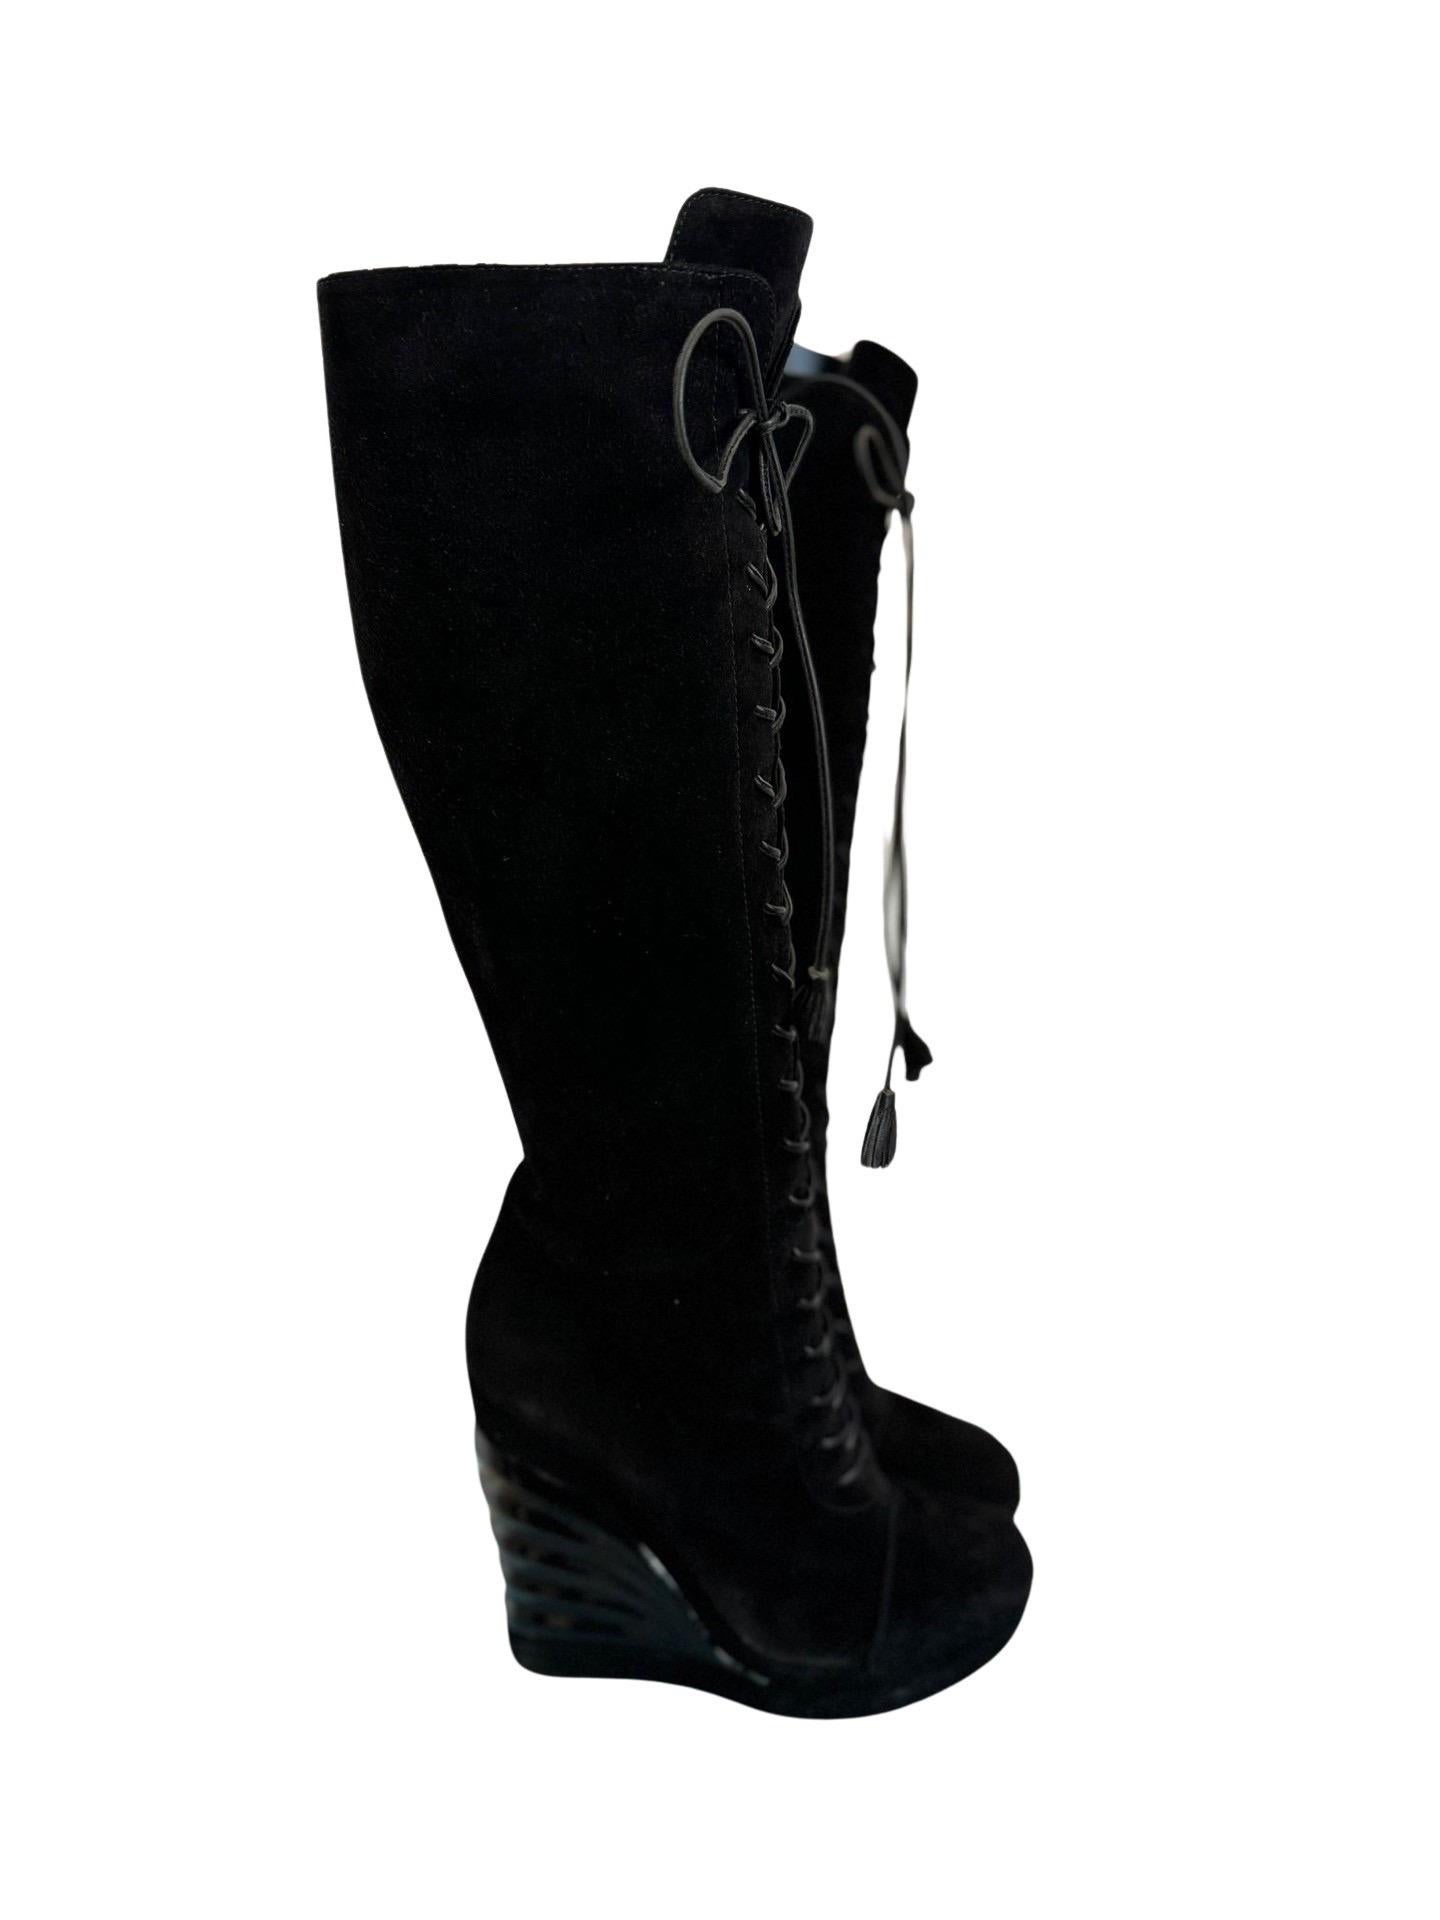 00s YSL Space Black Knee High Platform Boots 38.5 In Good Condition For Sale In Miami, FL